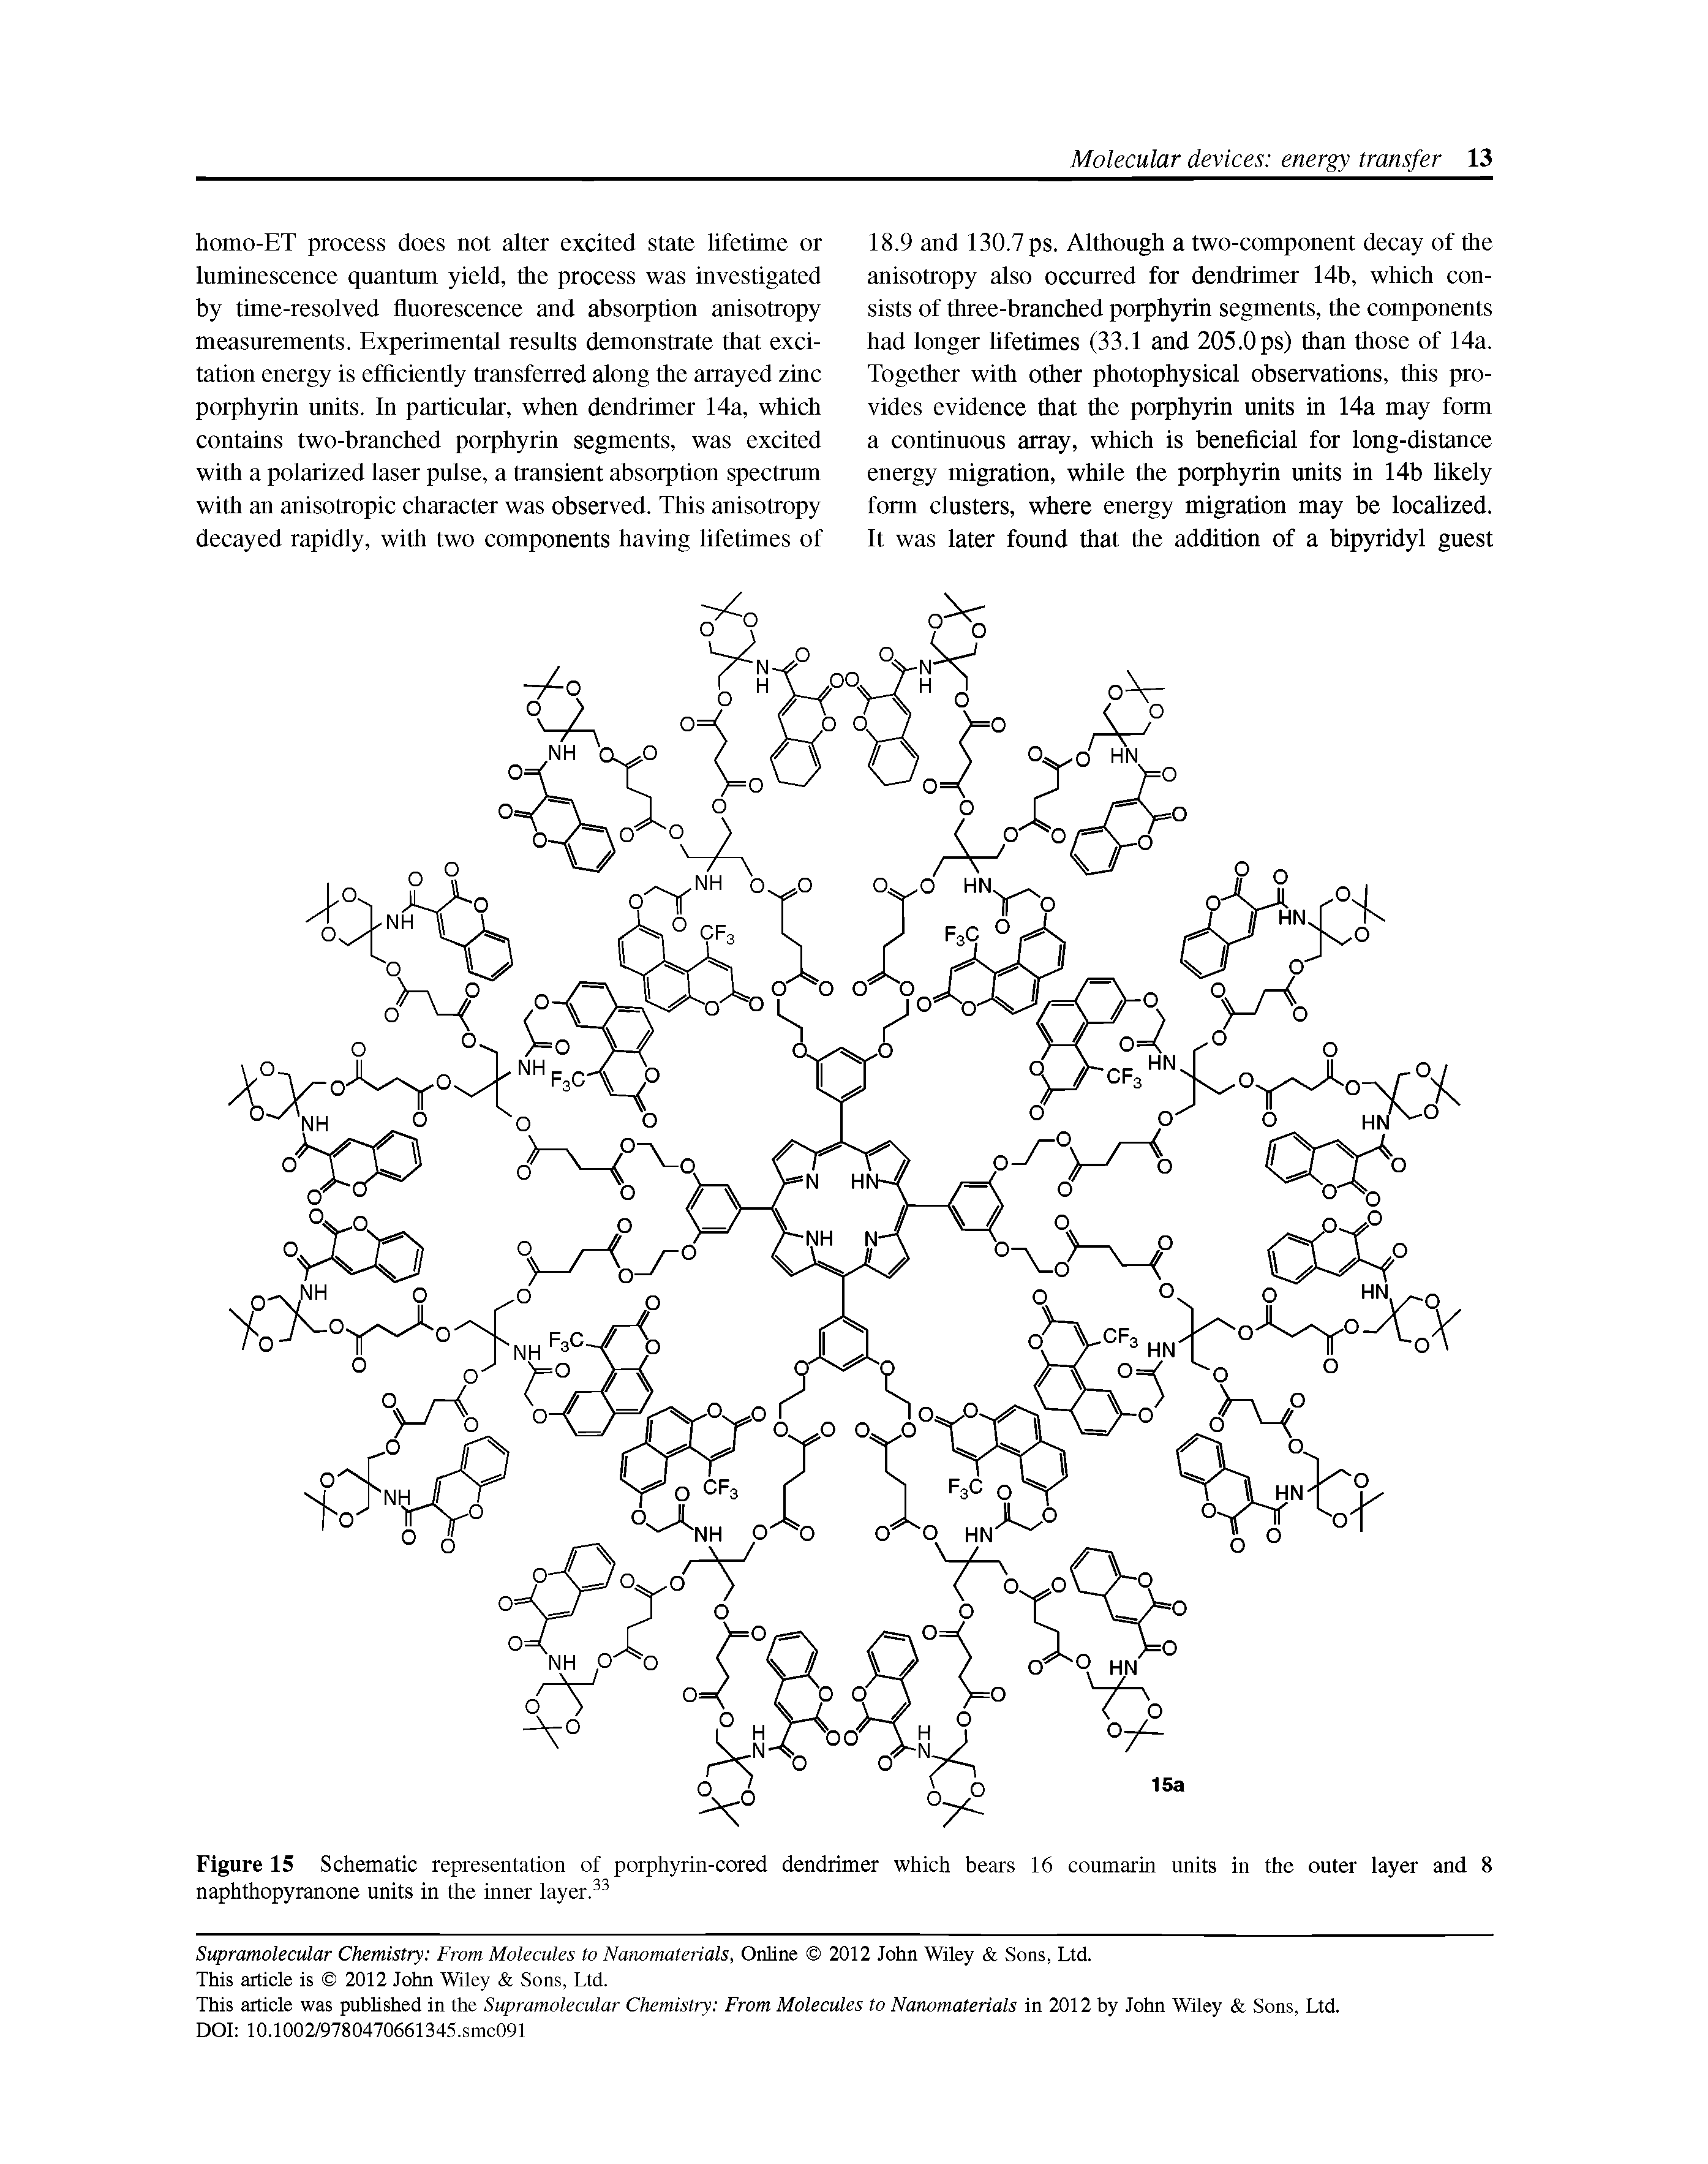 Figure 15 Schematic representation of porphyrin-cored dendrimer which bears 16 coumarin nnits in the outer layer and 8 naphthopyranone units in the inner layer. ...